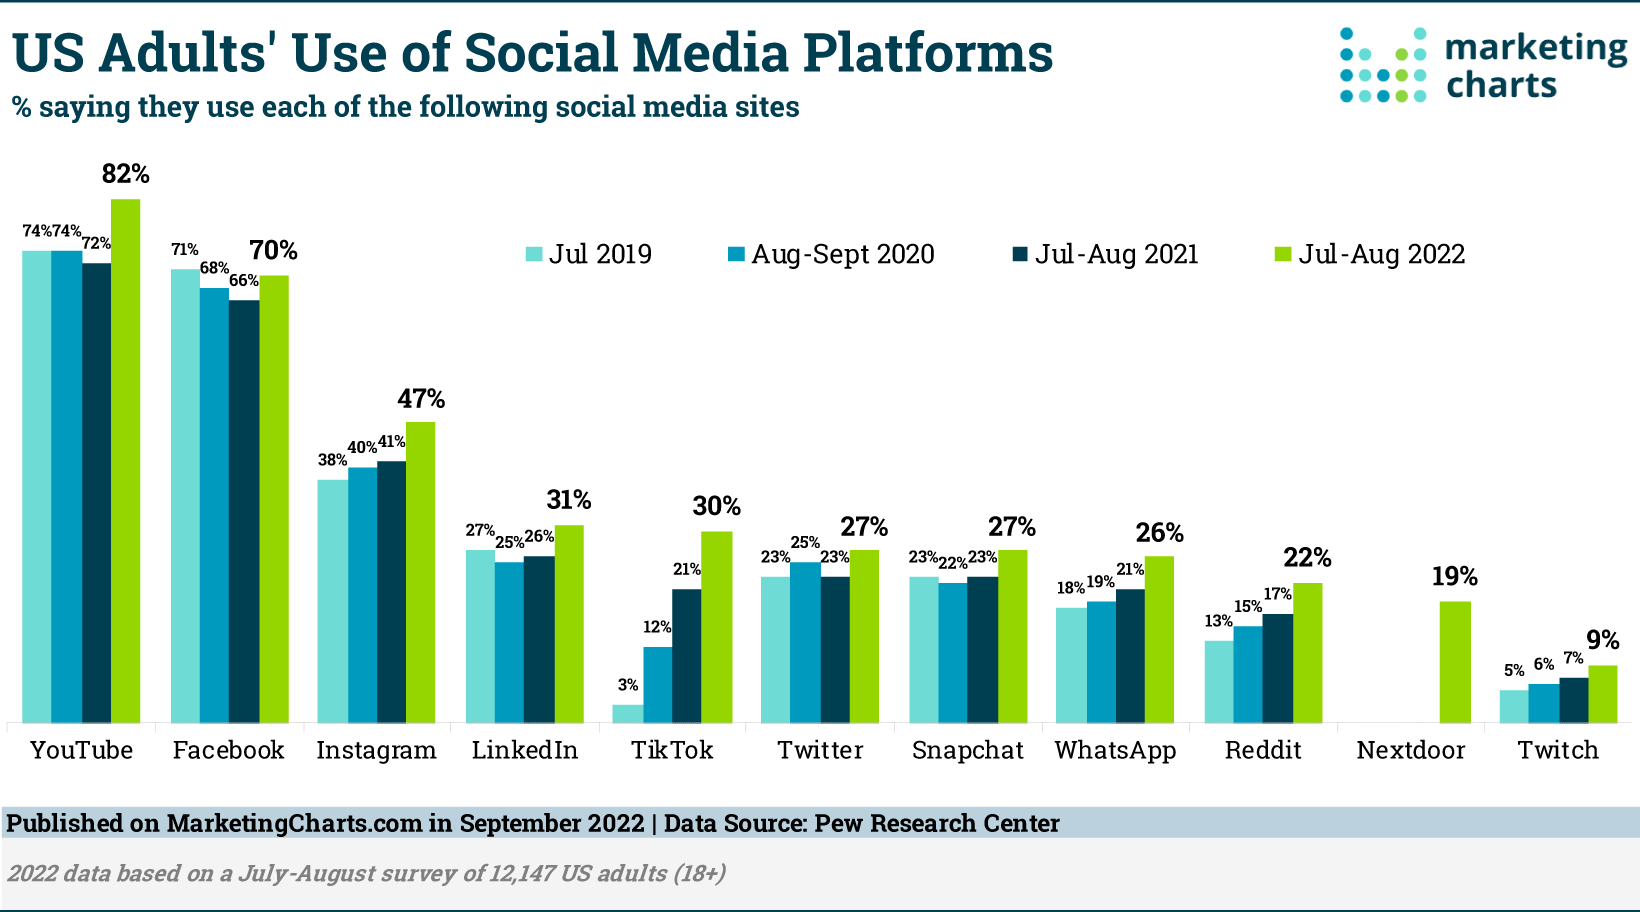 Visual representation of social media platform usage among American adults from 2019 to 2022. YouTube takes the lead as the most popular platform, followed by Facebook and Instagram. Over the 3-year span, YouTube's usage increased by an impressive 8%, while Facebook experienced a slight 1% decline.